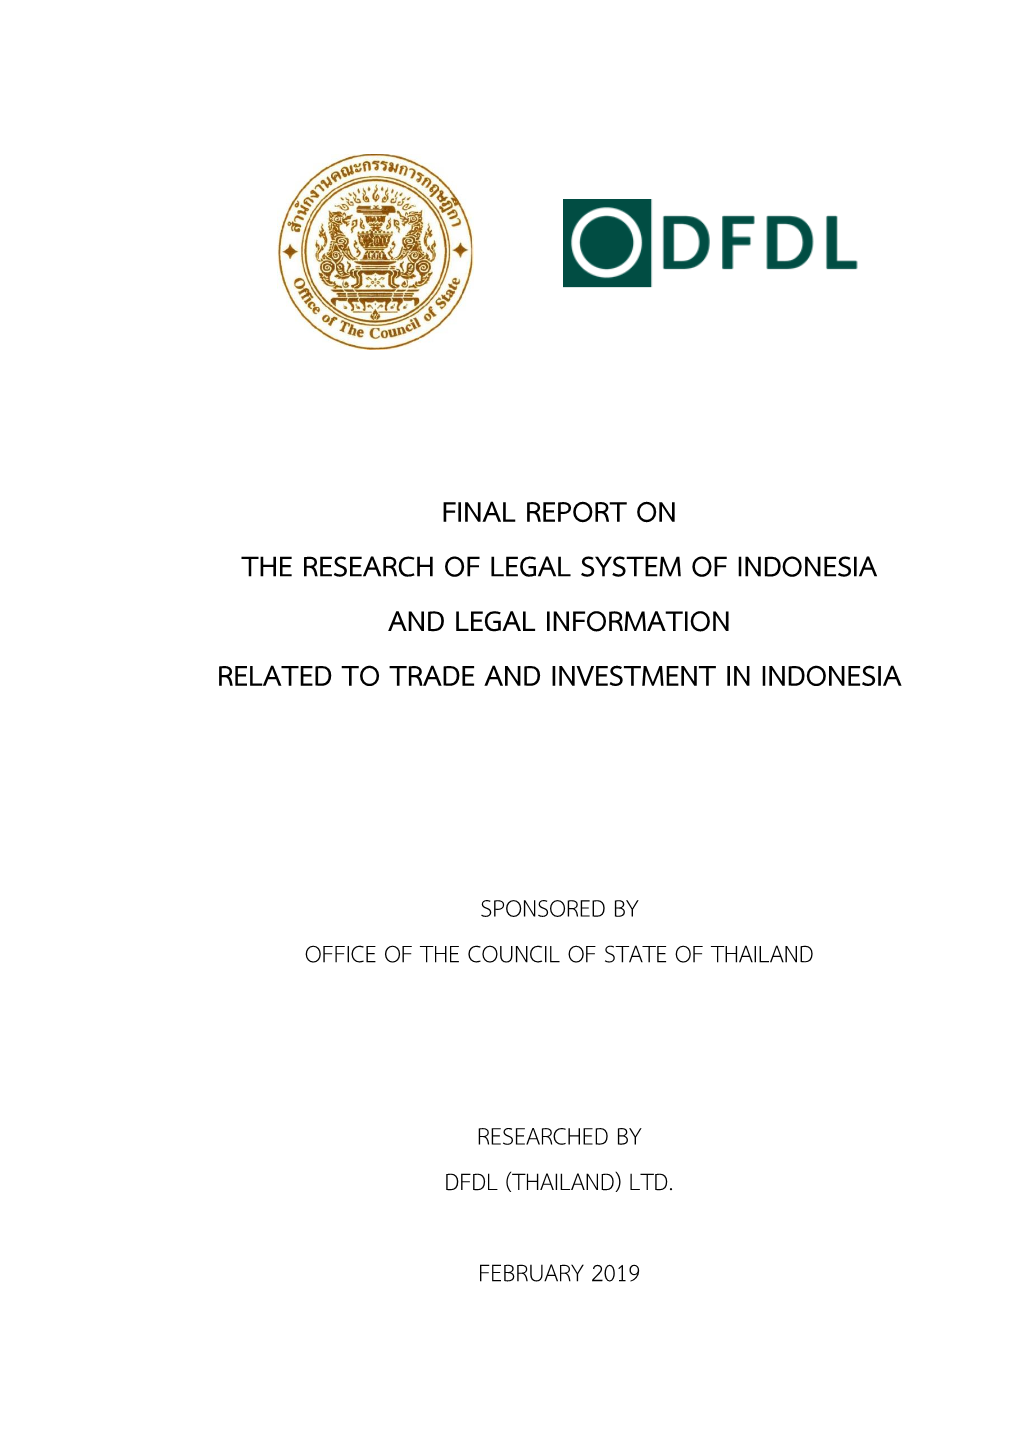 Final Report on the Research of Legal System of Indonesia and Legal Information Related to Trade and Investment in Indonesia